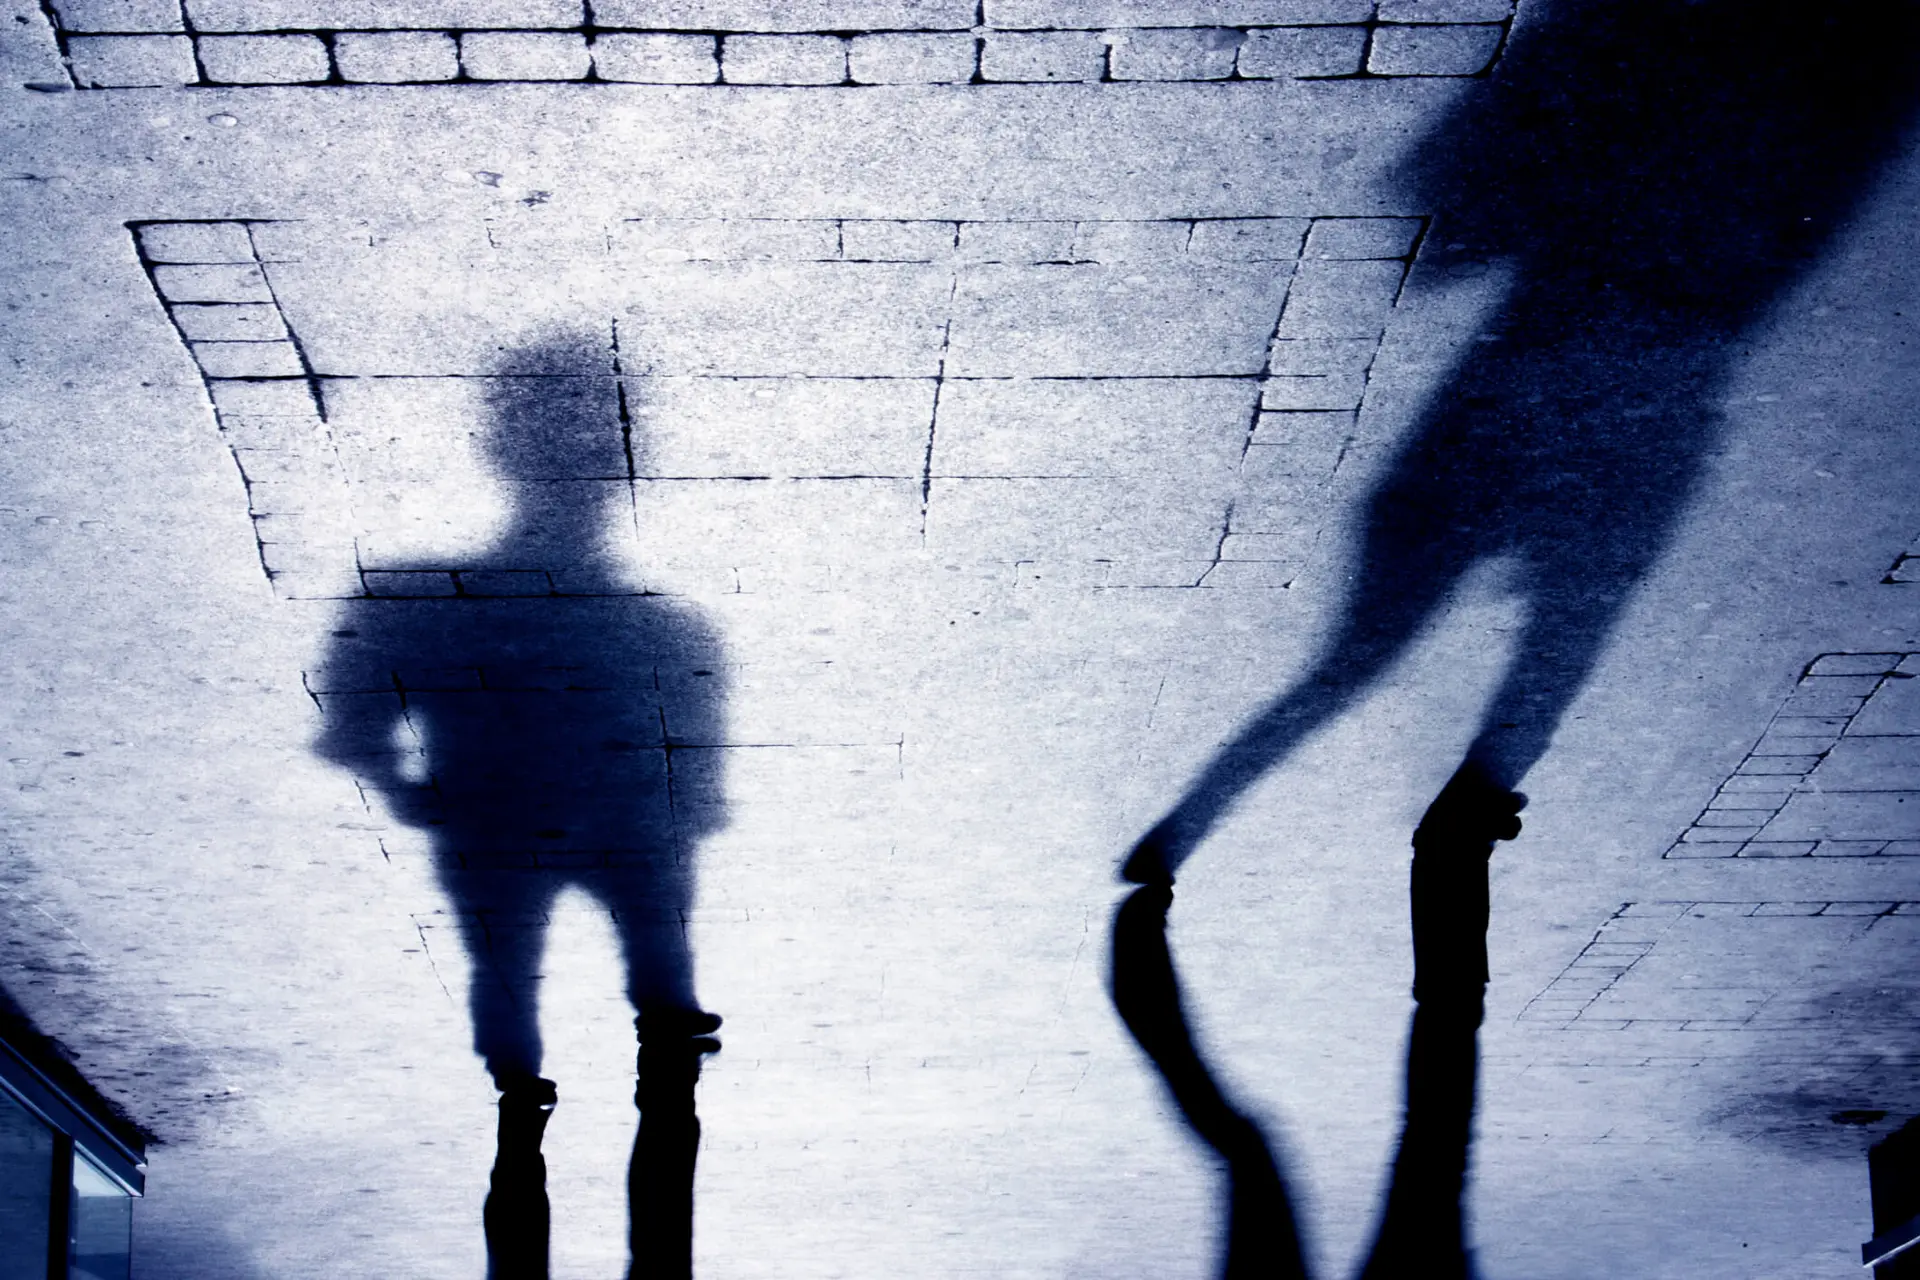 Two shadows of two people. The person on the left is standing with their hands on their hips, the person on the right is walking away from the person on the left.